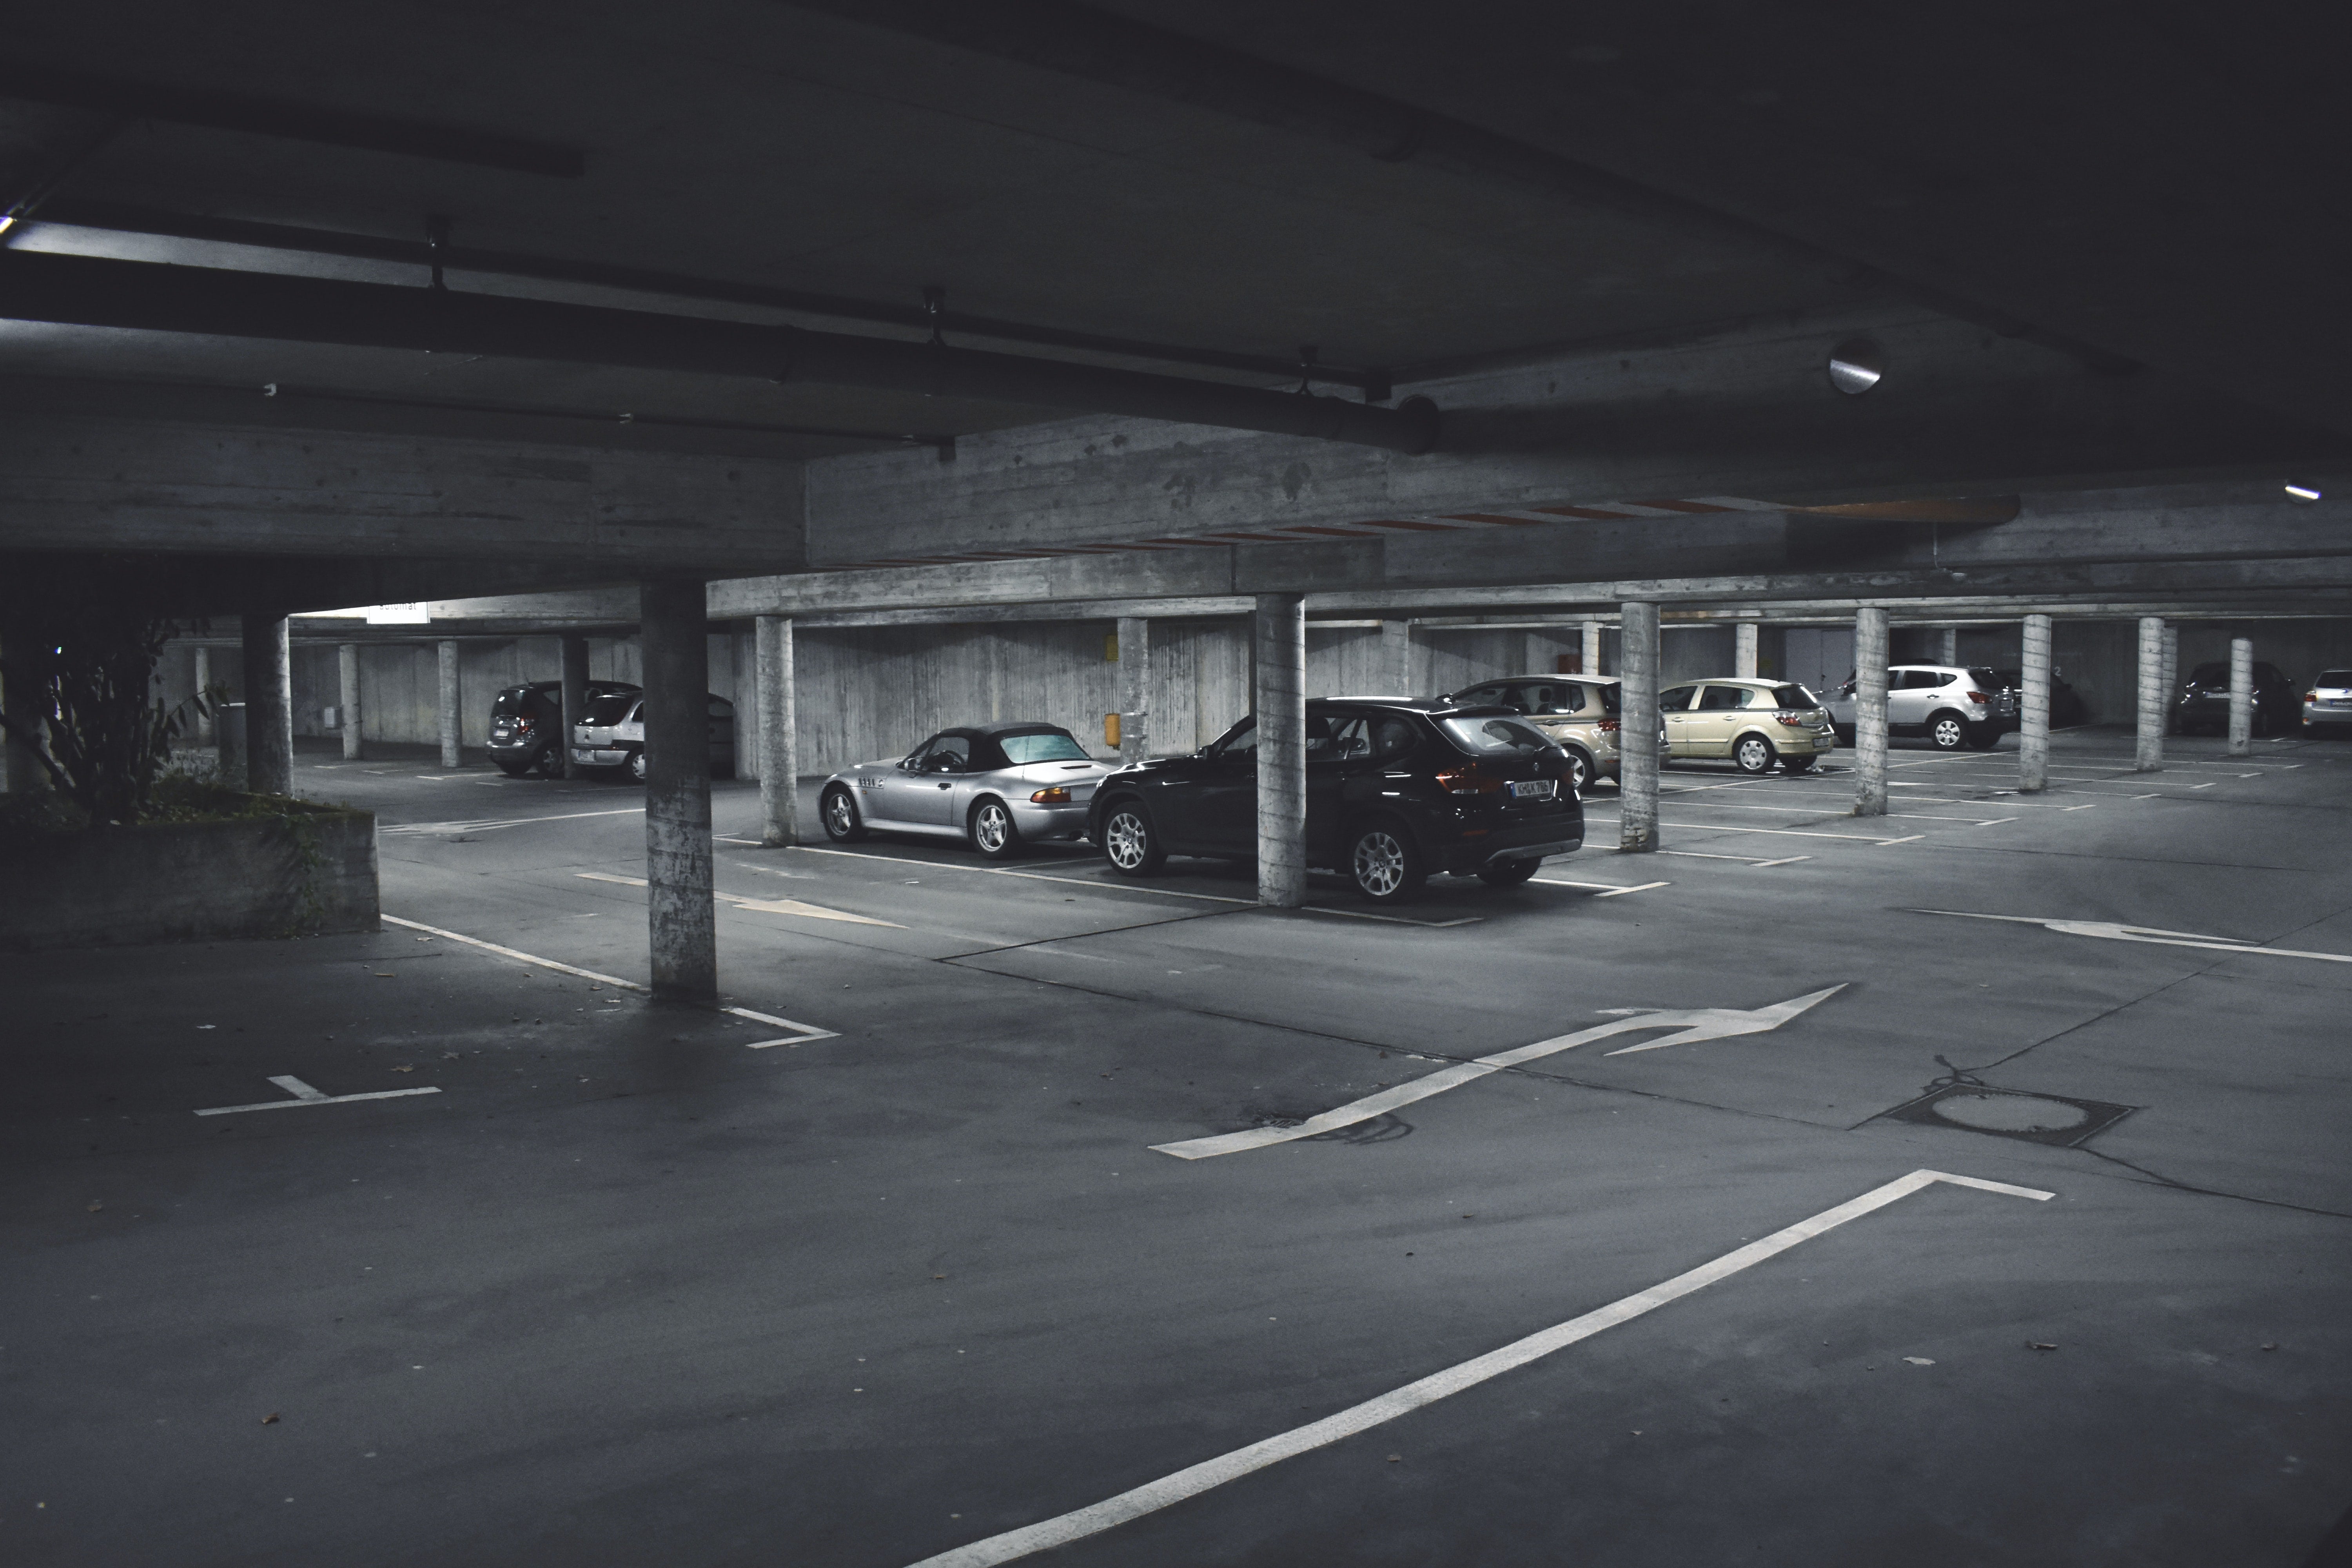 Can parking in your own car space be considered a nuisance?